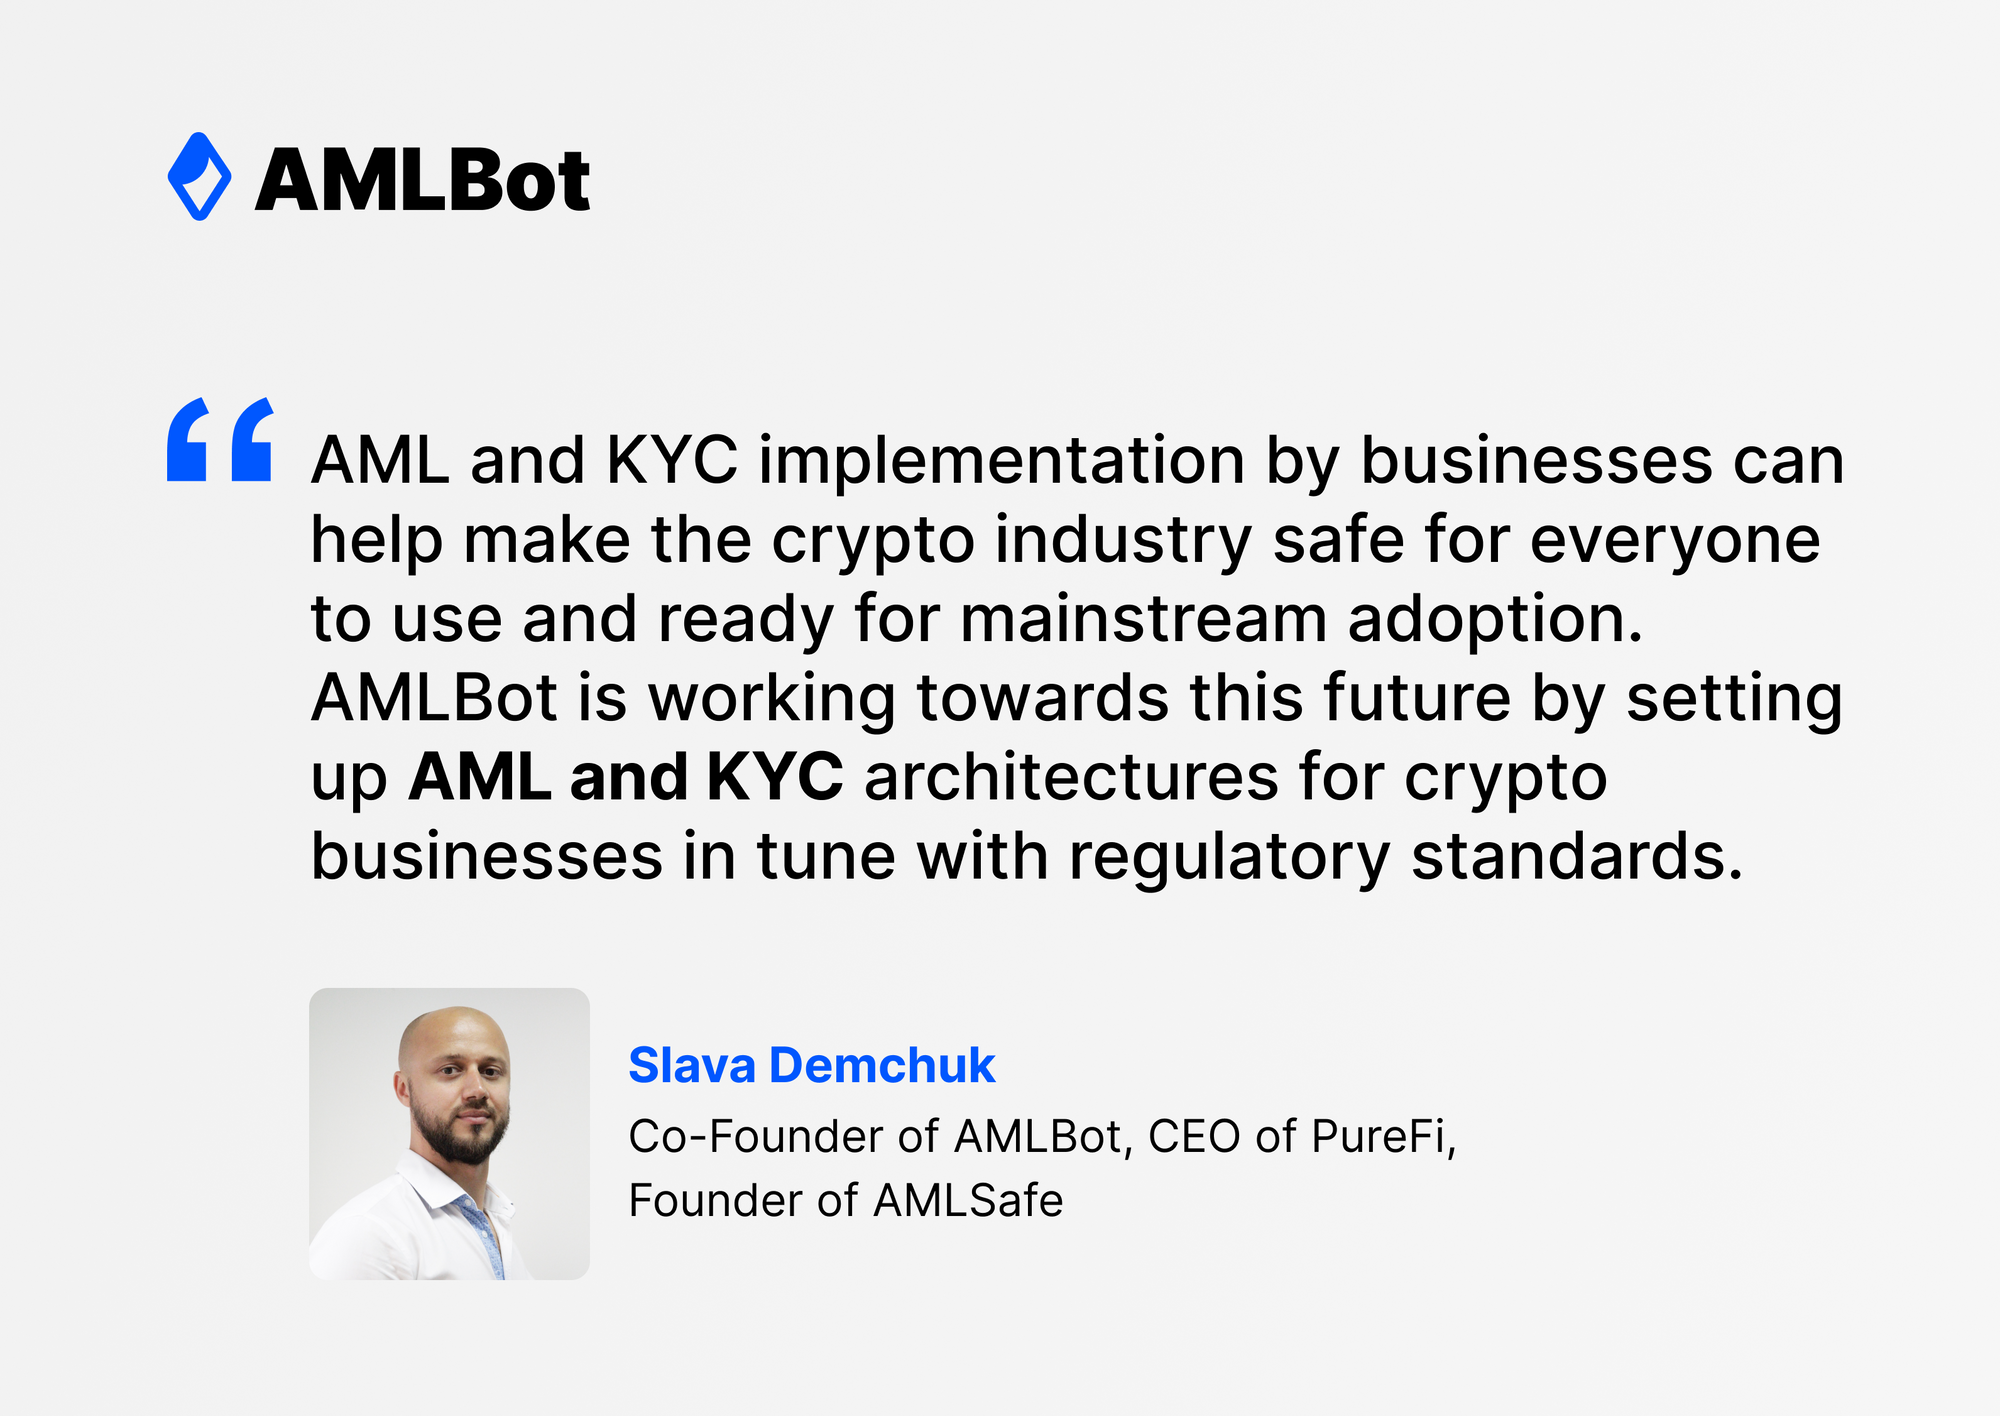 "AML and KYC implementation by businesses" Slava Demchuk Co-Founder of AMLBot, CEO of PureFi, Founder of AMLSafe